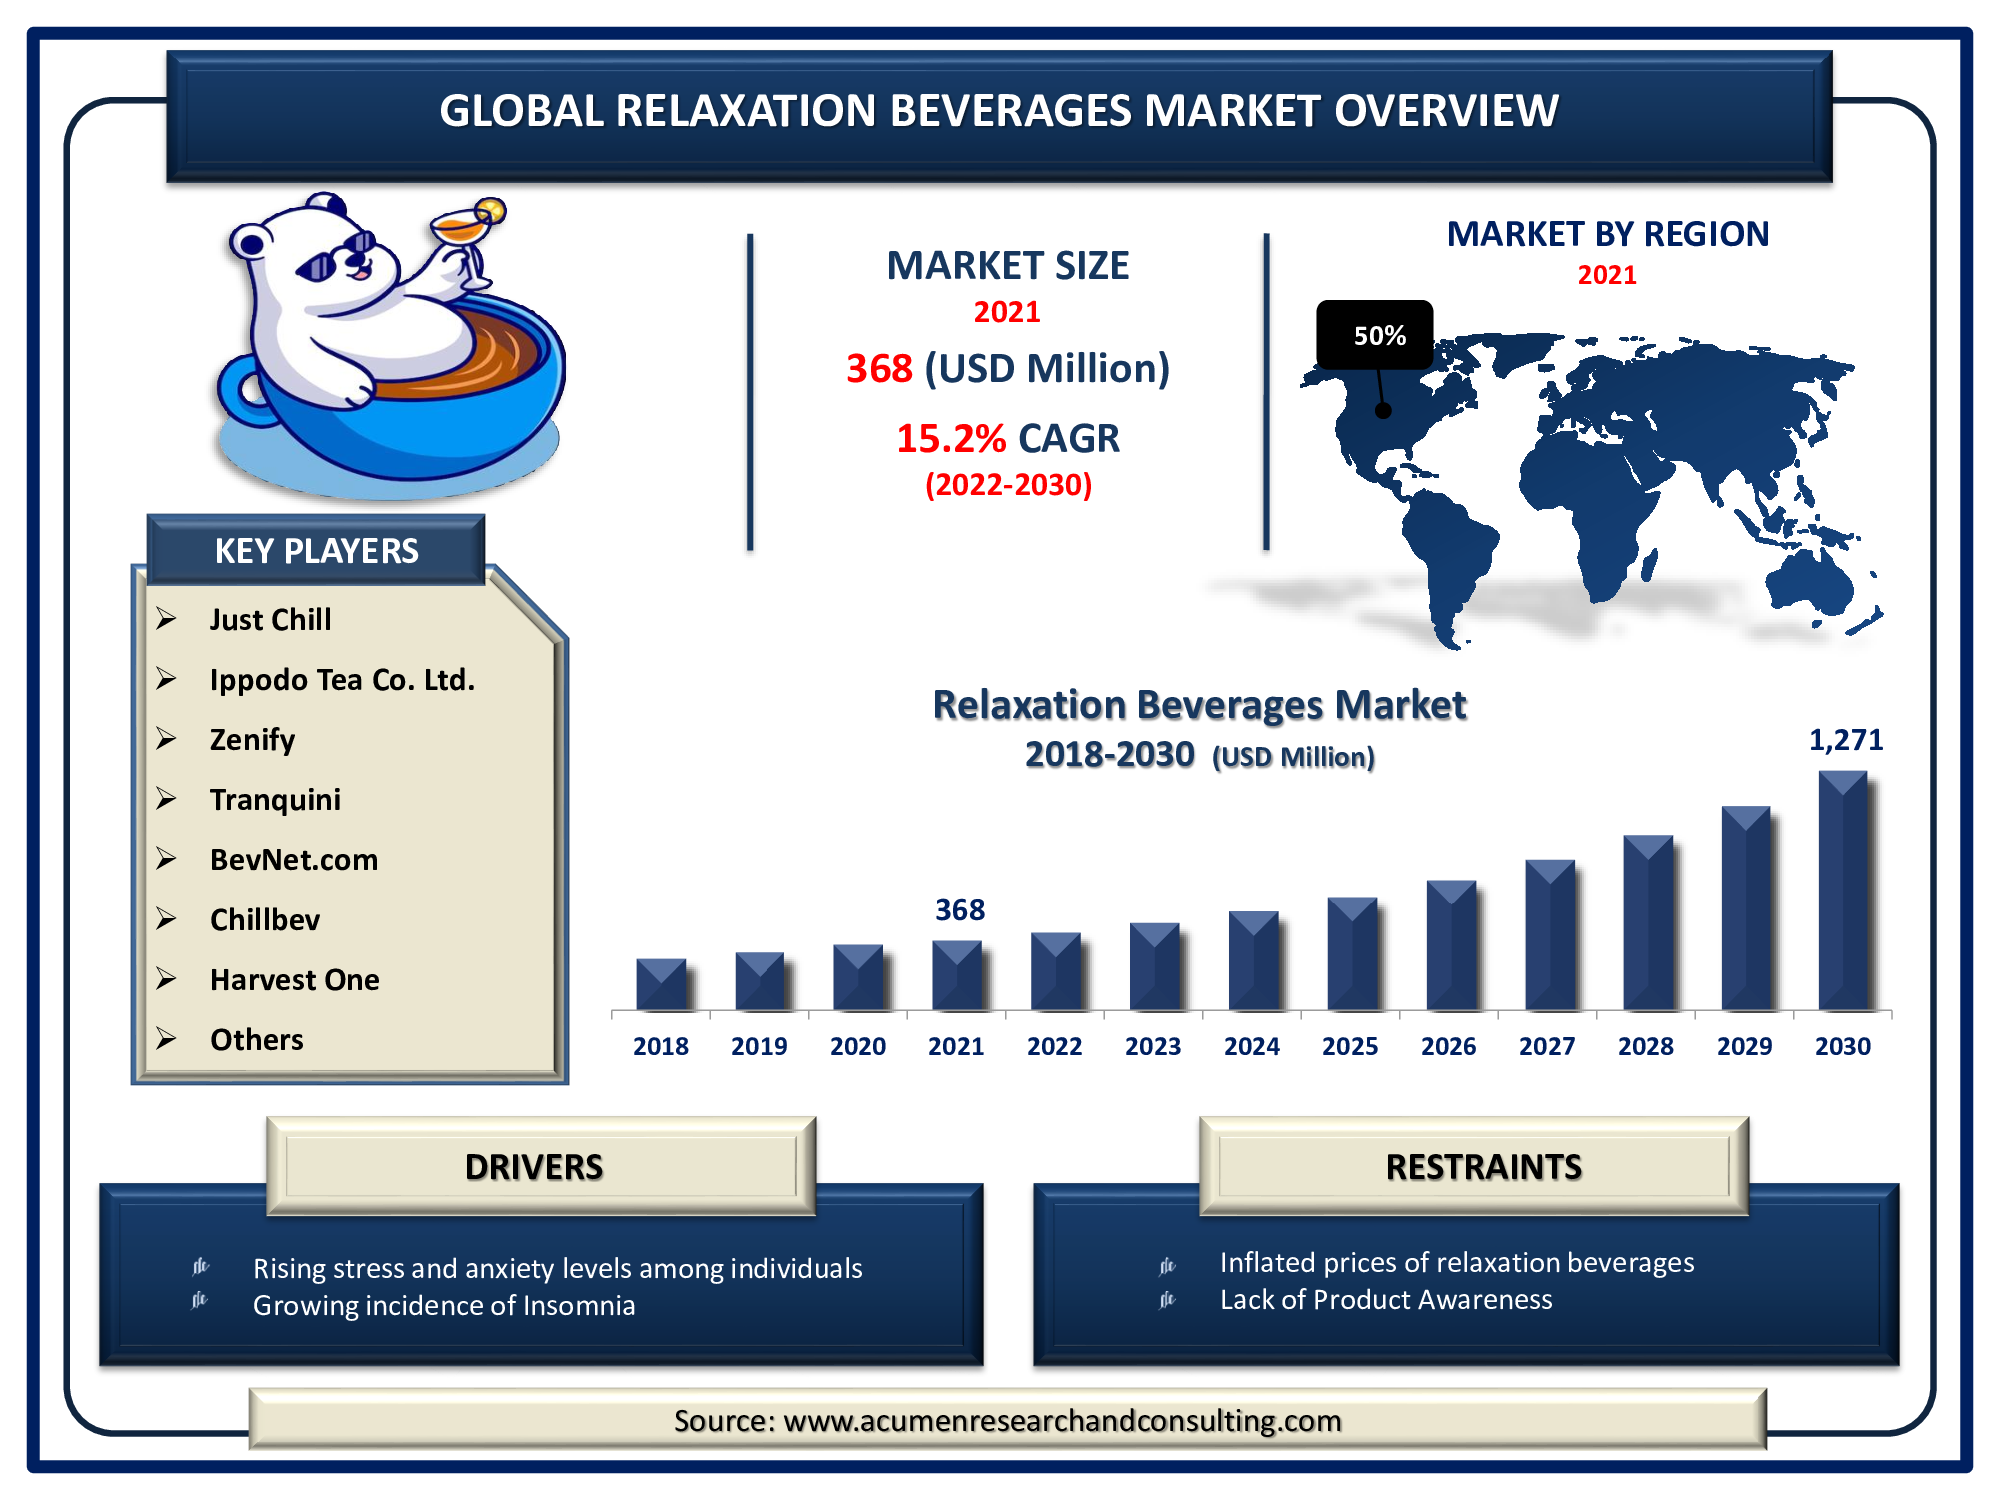 Relaxation Beverages Market Size was valued at USD 368 Million in 2021 and is predicted to be worth USD 1,271 Million by 2030, with a CAGR of 15.2% from 2022 to 2030.